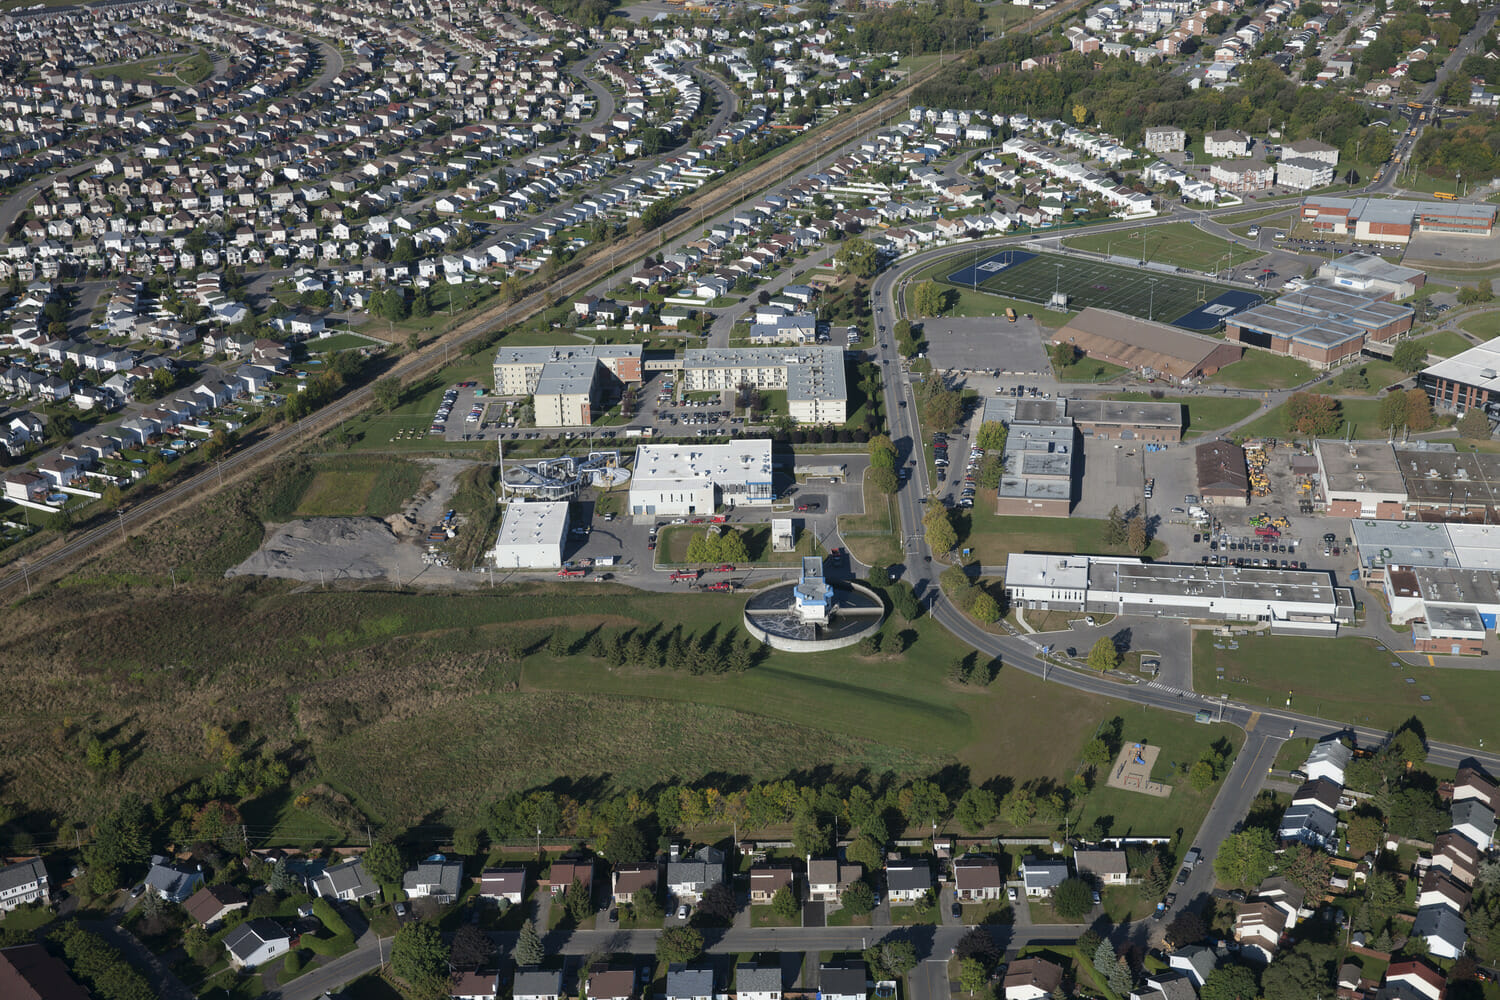 An aerial view of a college campus.